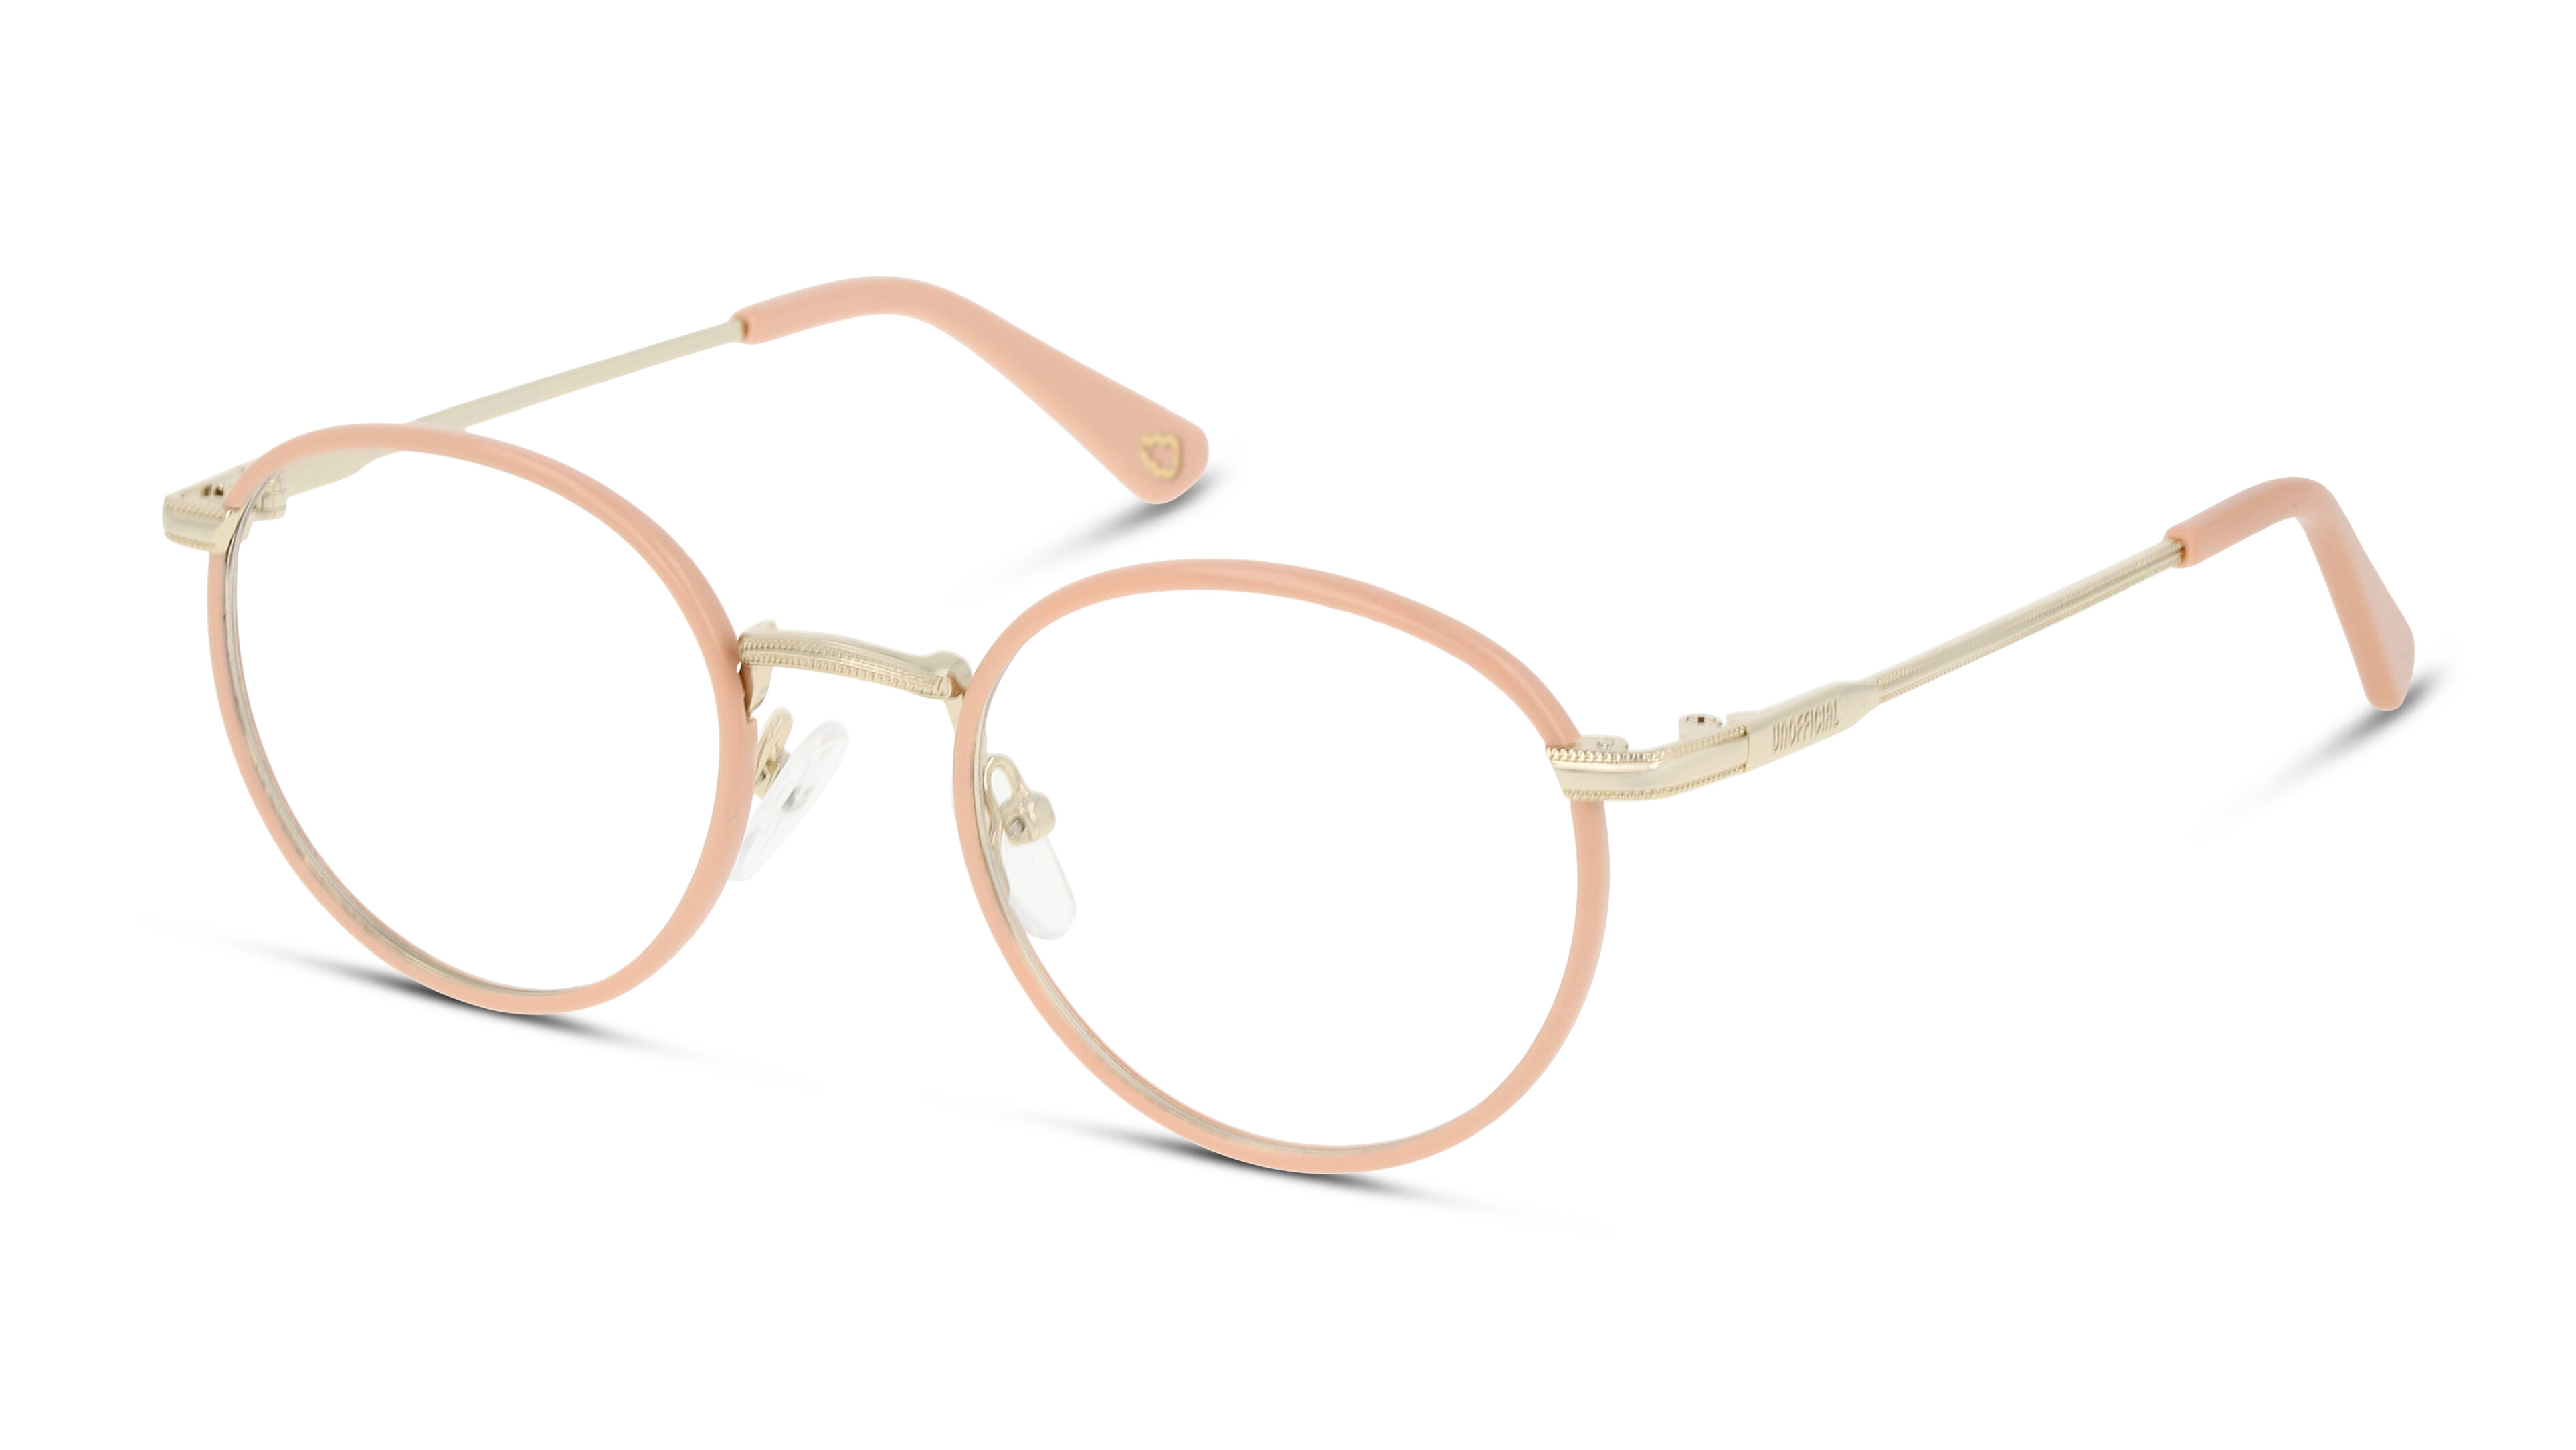 Angle_Left01 UNOFFICIAL UNOT0104 PD00 Brille Rosa, Goldfarben